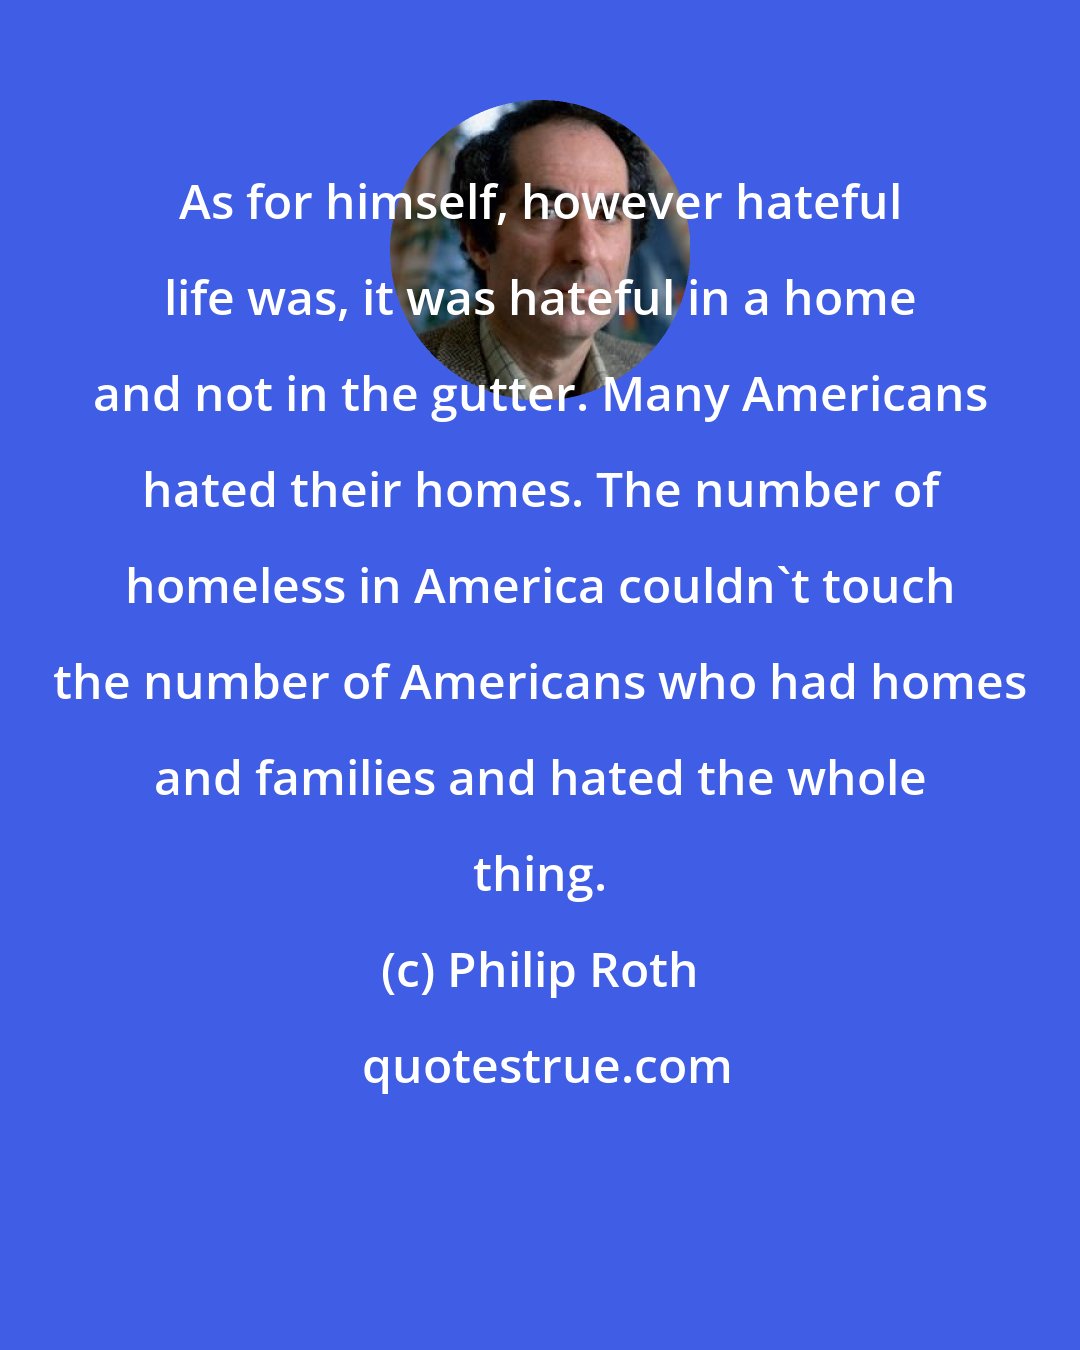 Philip Roth: As for himself, however hateful life was, it was hateful in a home and not in the gutter. Many Americans hated their homes. The number of homeless in America couldn't touch the number of Americans who had homes and families and hated the whole thing.